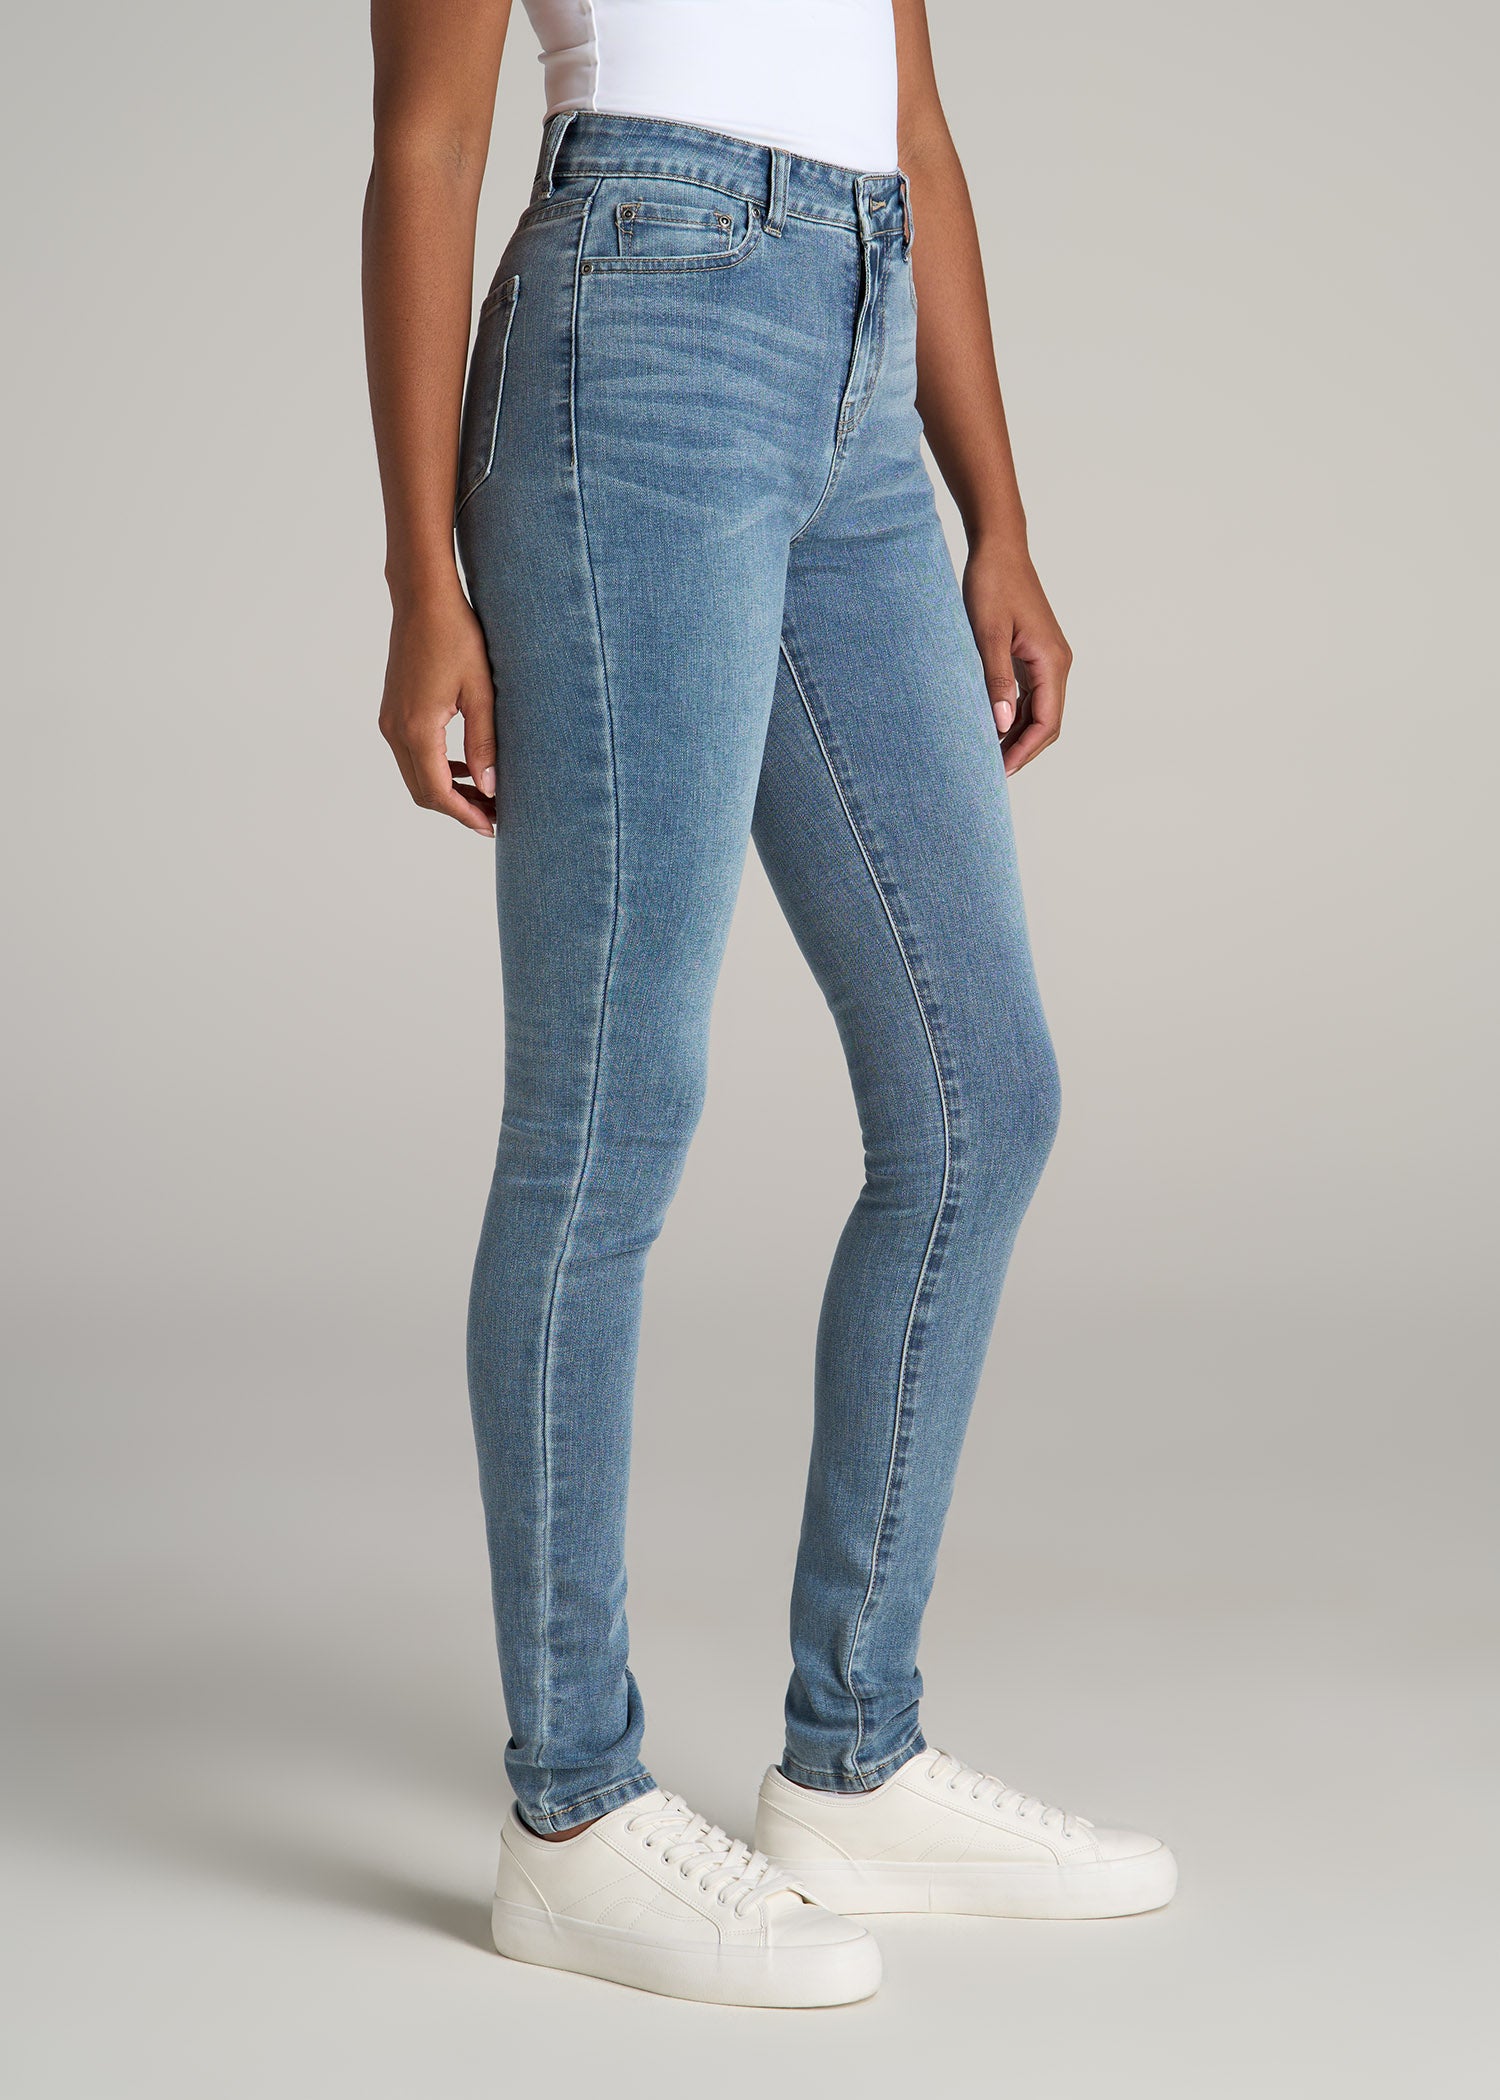 JEANS COLLECTION - WOMEN